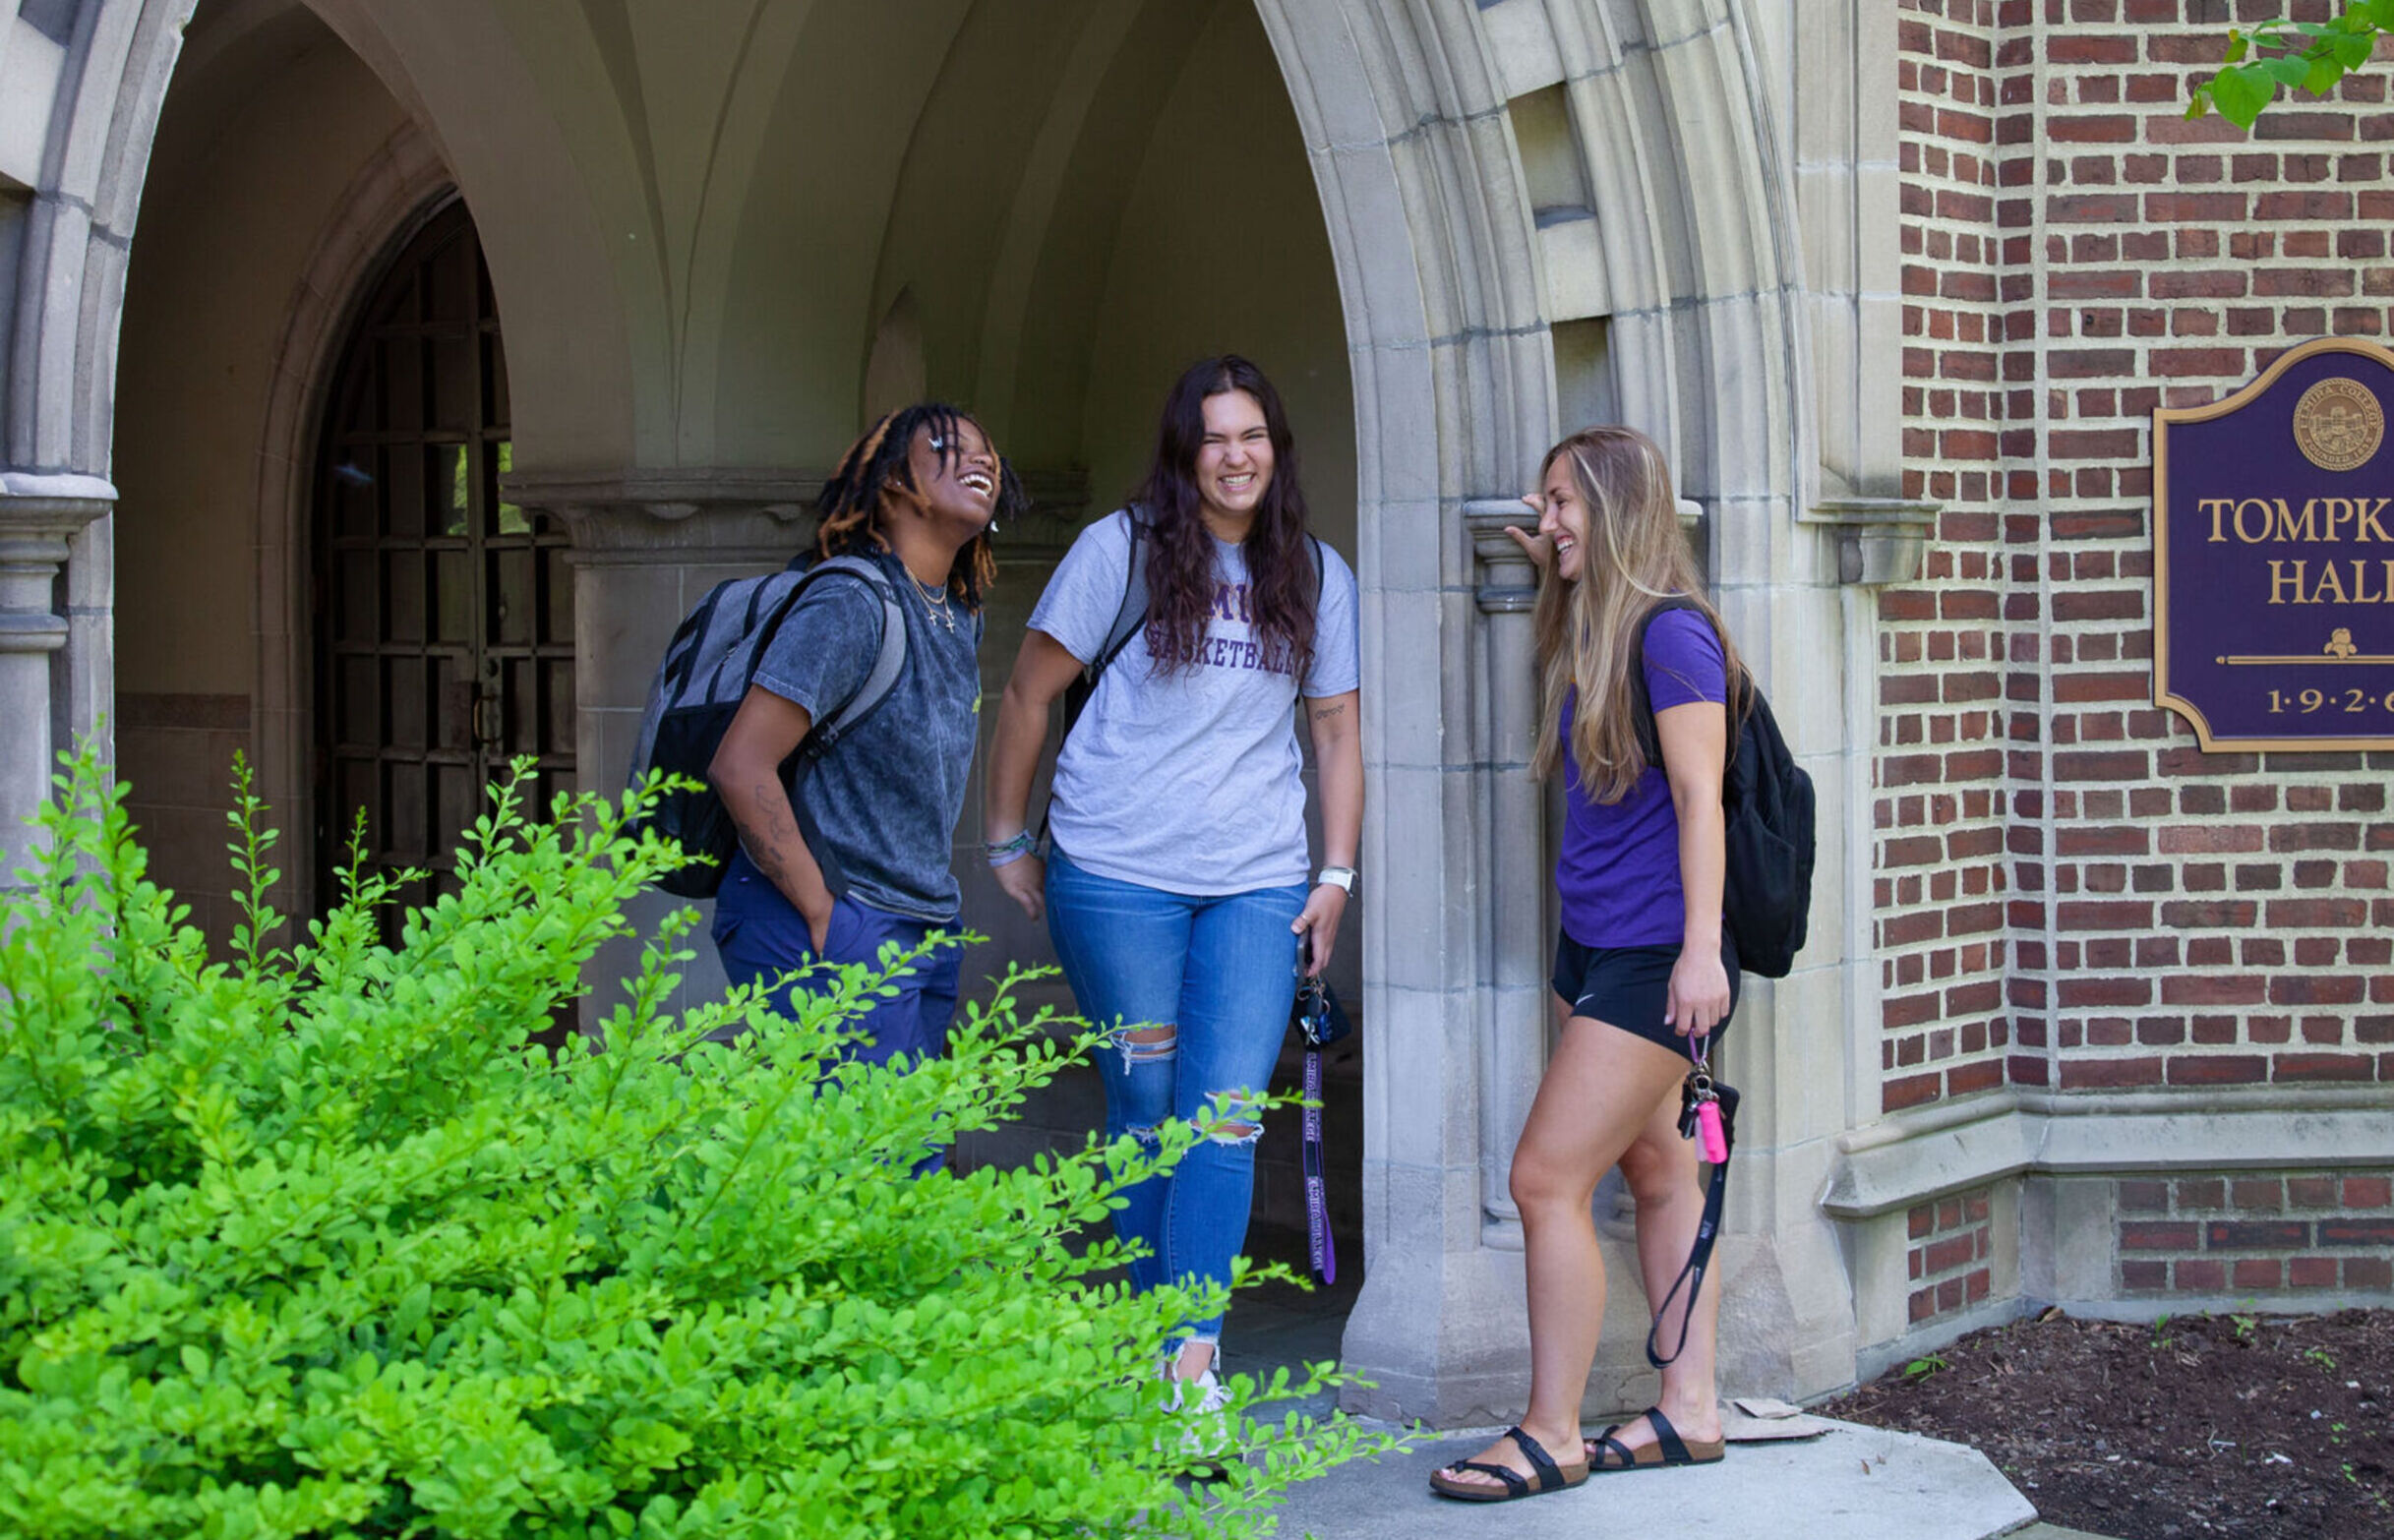 Three female students laugh while hanging out at the entrance of Tompkins Hall